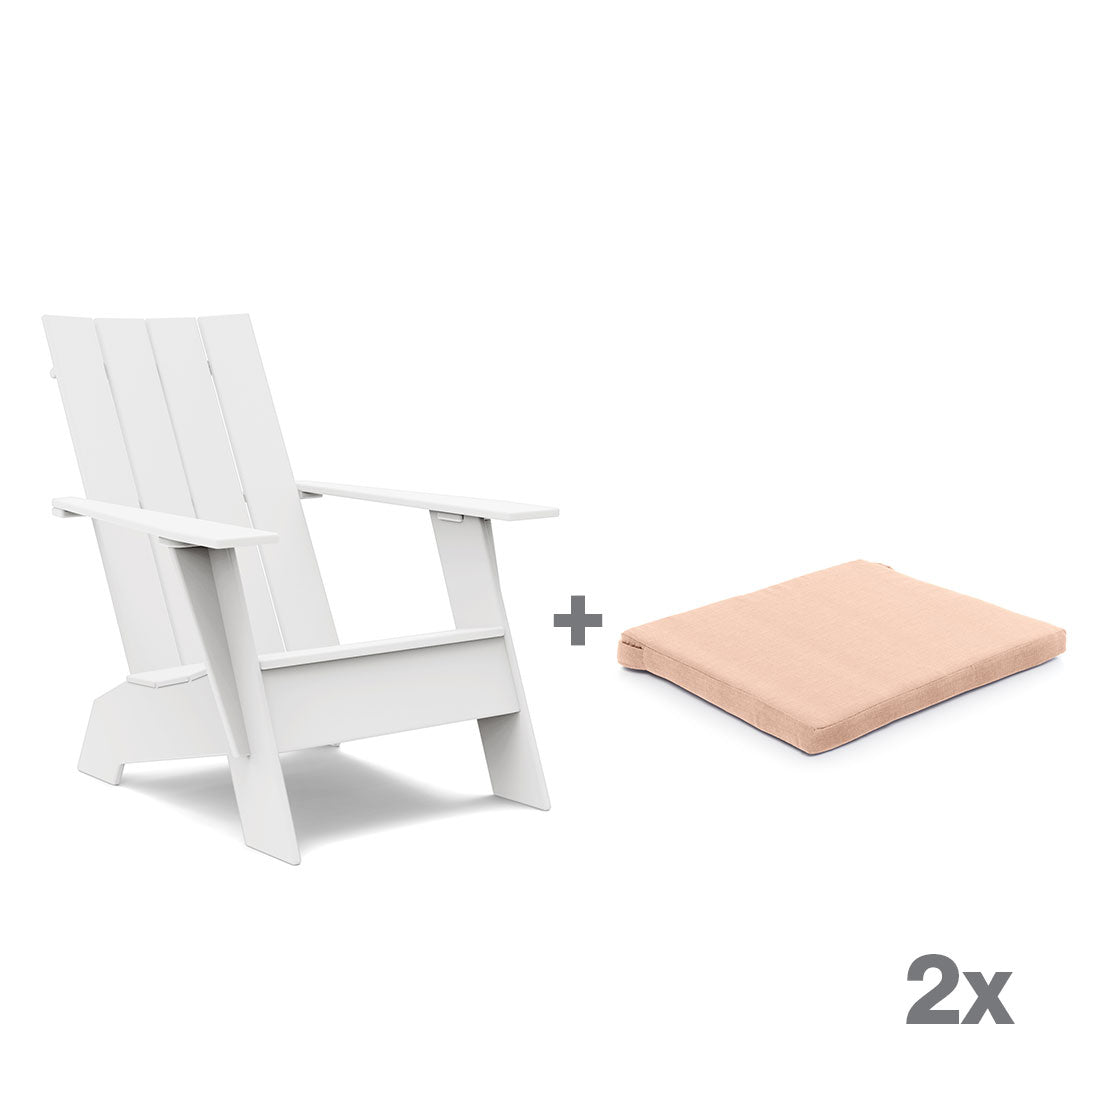 Loll Designs Adirondack Chairs with Seat Cushions Bundle, Overstock - Default Title